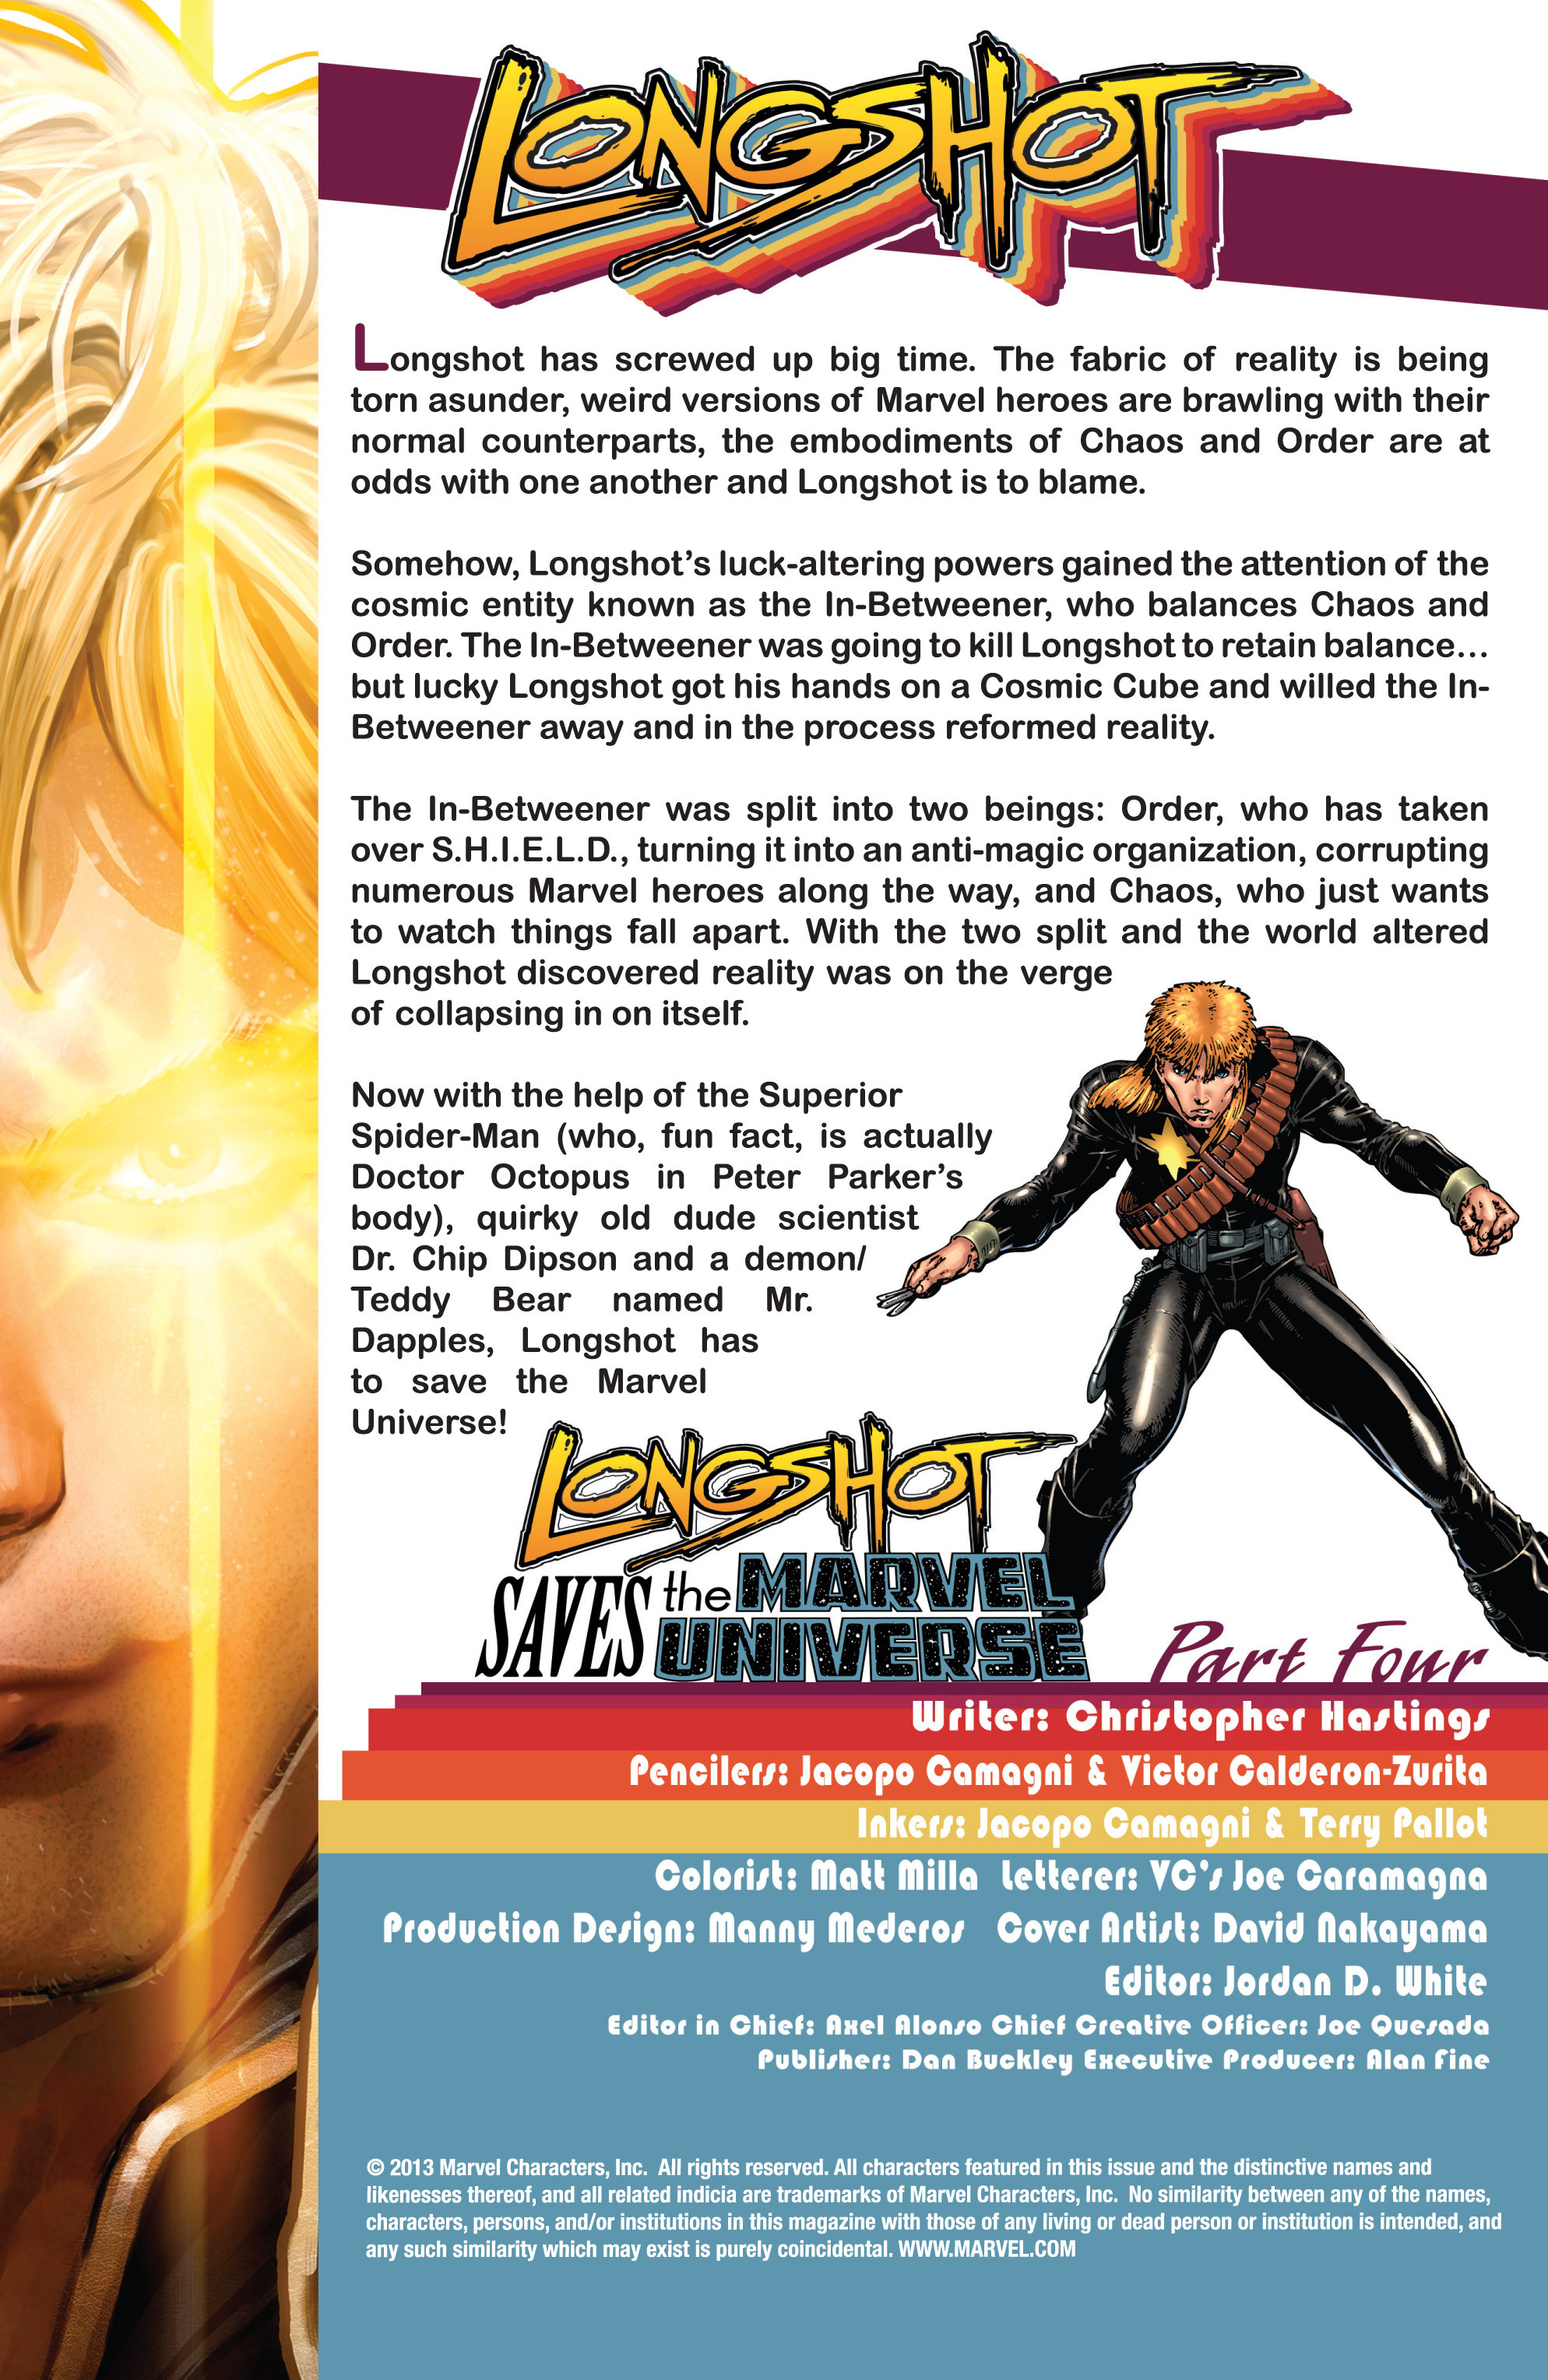 Read online Longshot Saves the Marvel Universe comic -  Issue #4 - 2